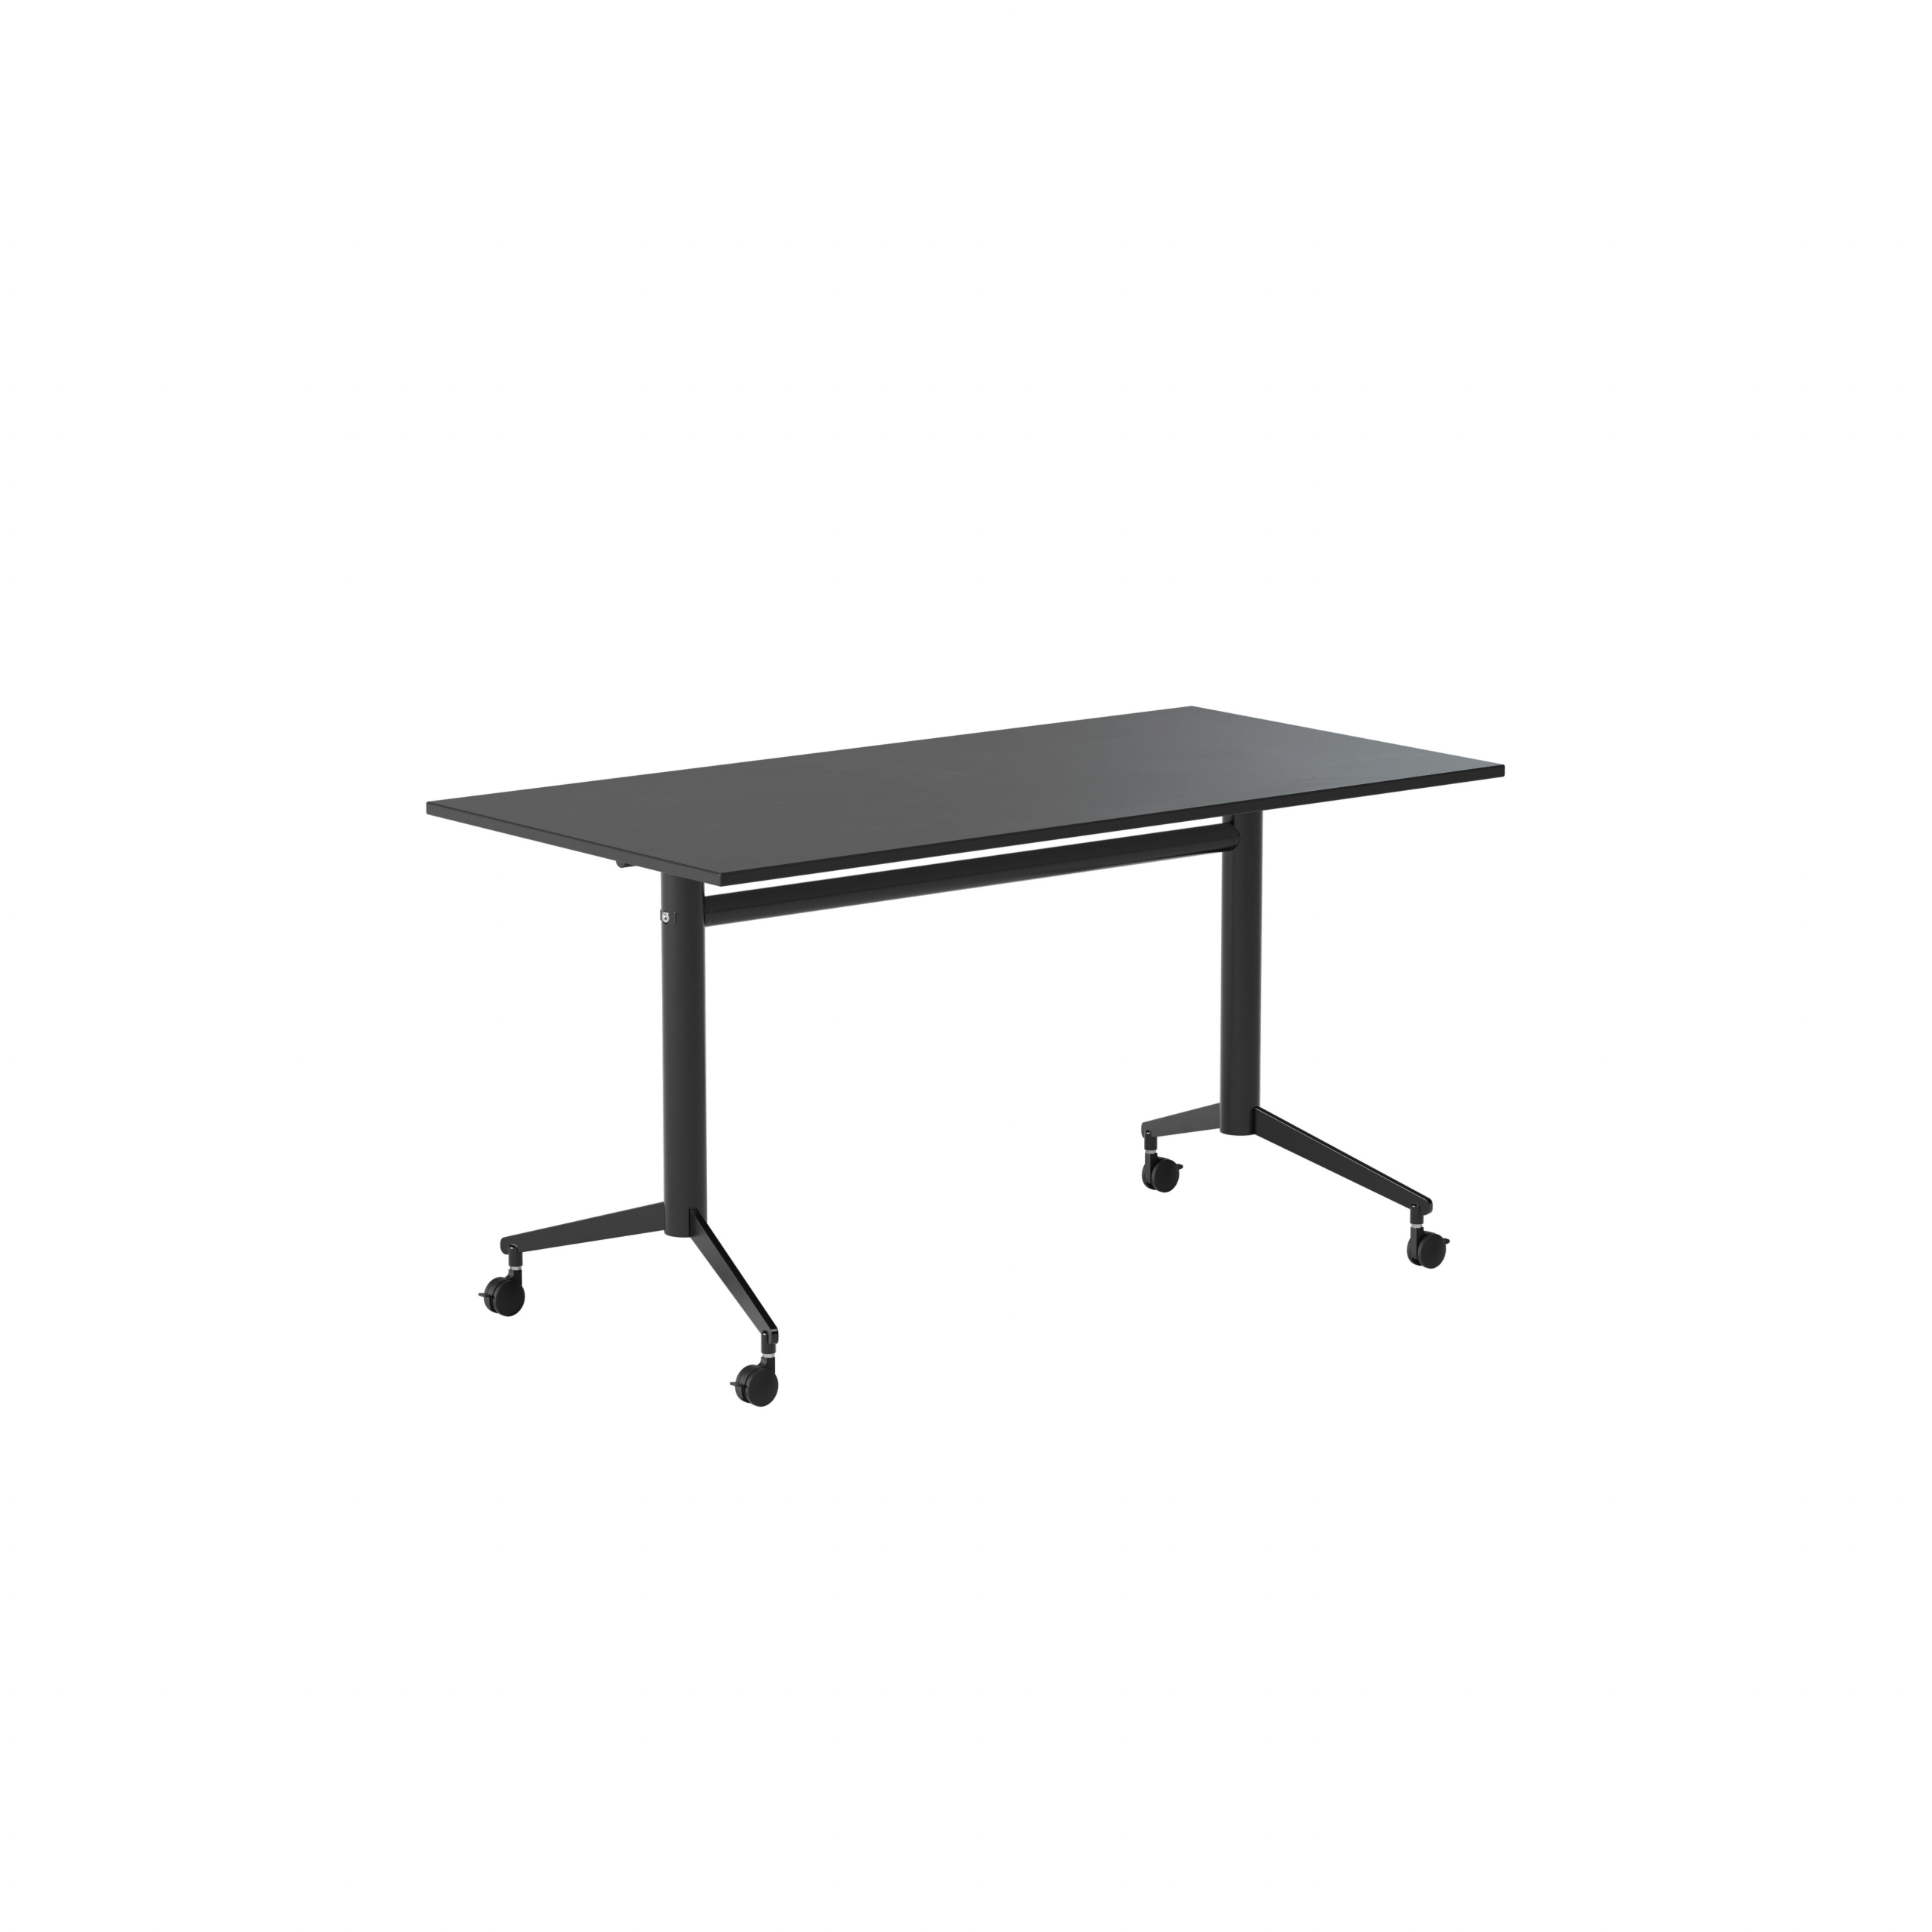 HideAway Pillar table with tiltable top, two legs product image 1